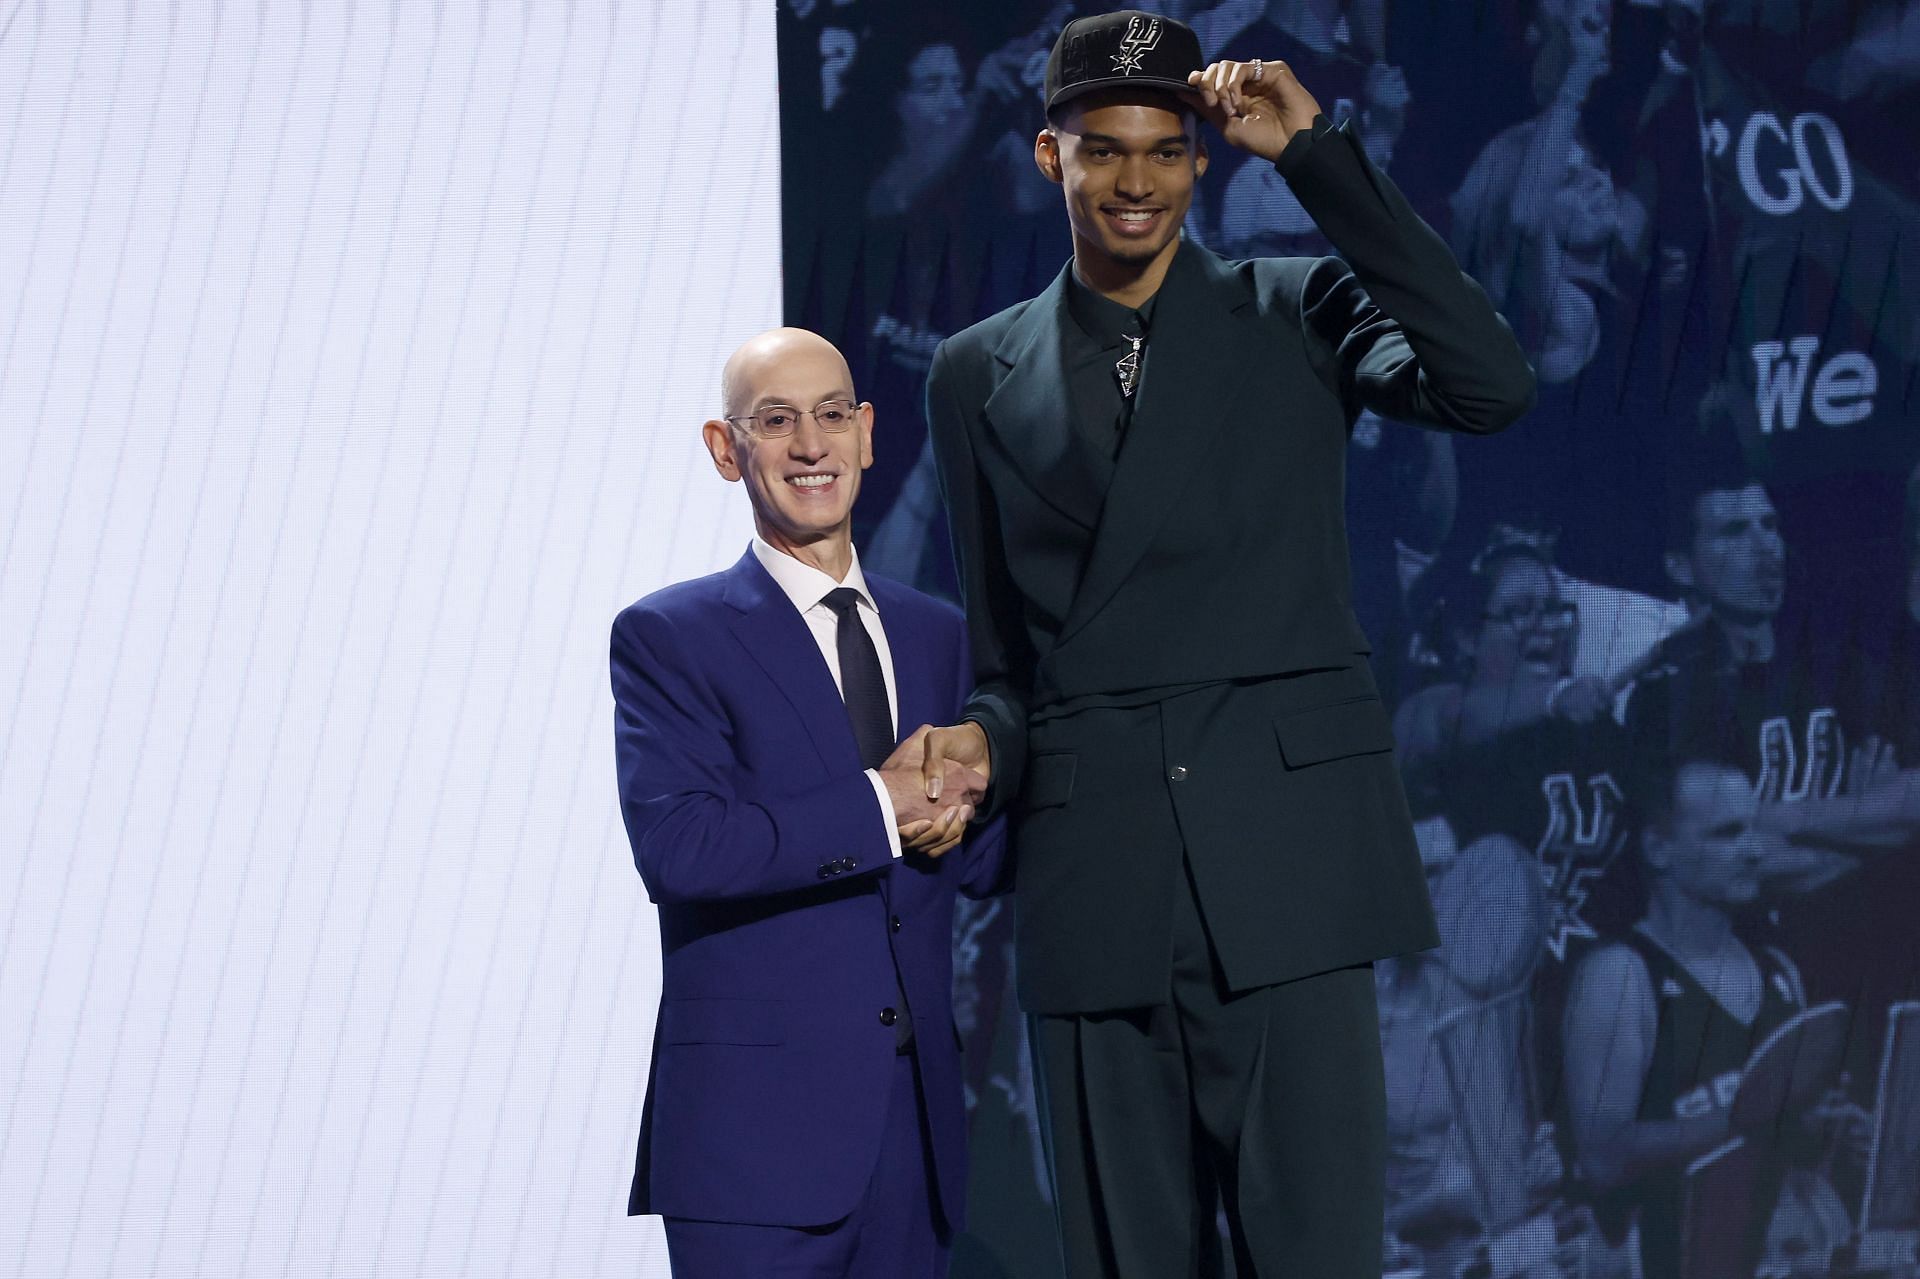 Victor Wembanyama (R) poses with NBA commissioner Adam Silver (L) after being drafted first overall pick by the San Antonio Spurs in the 2023 NBA draft